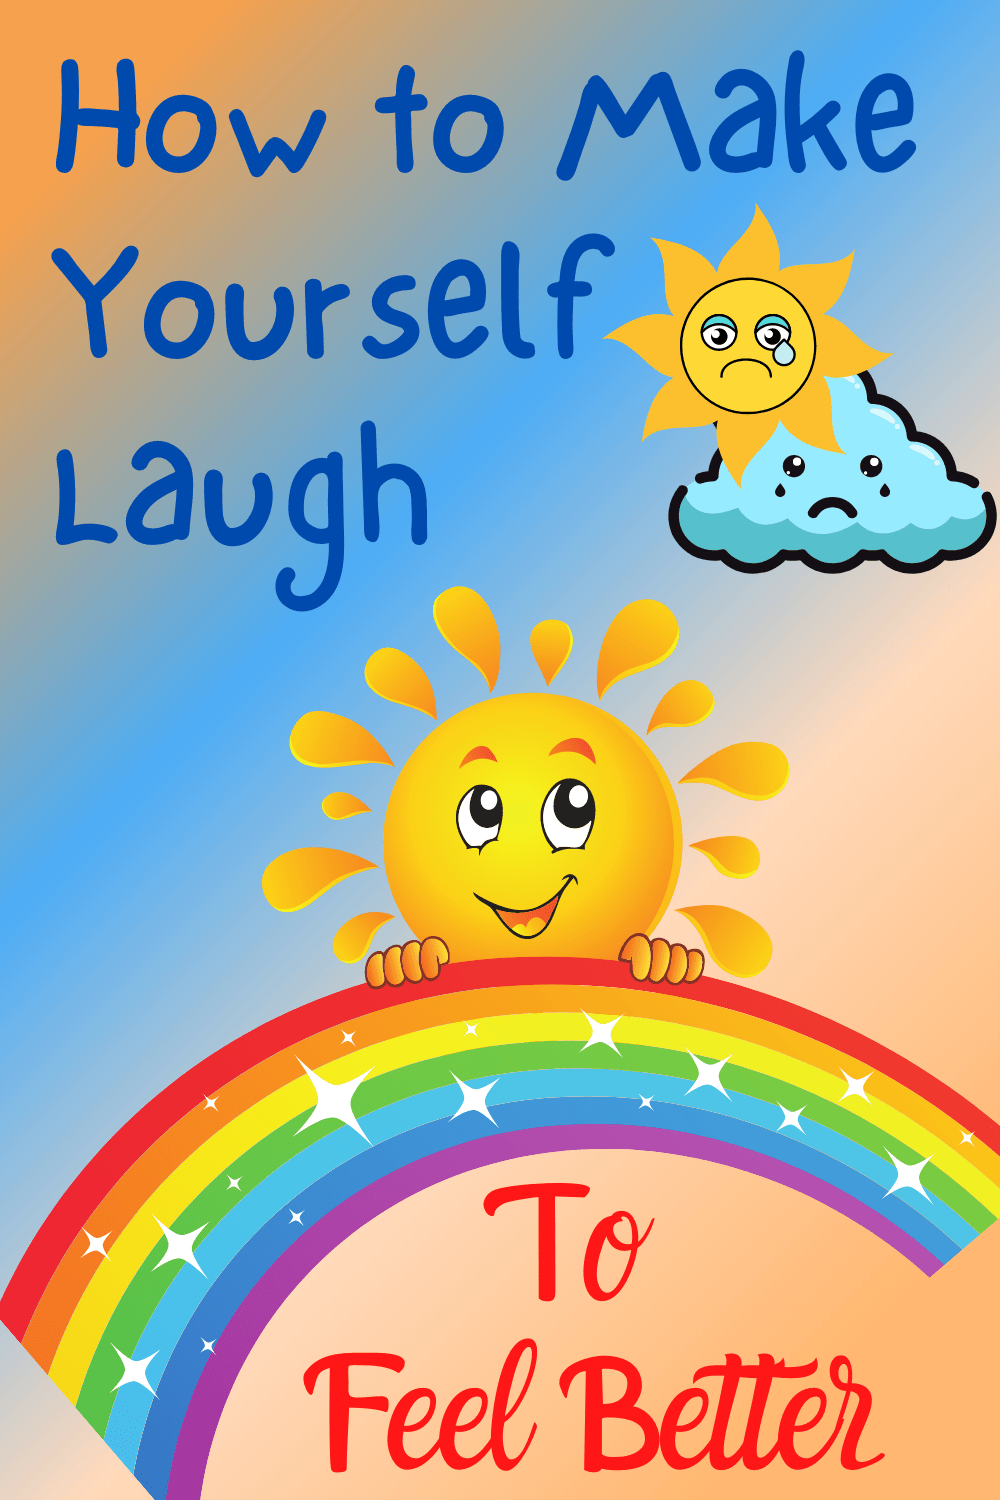 How to make yourself laugh